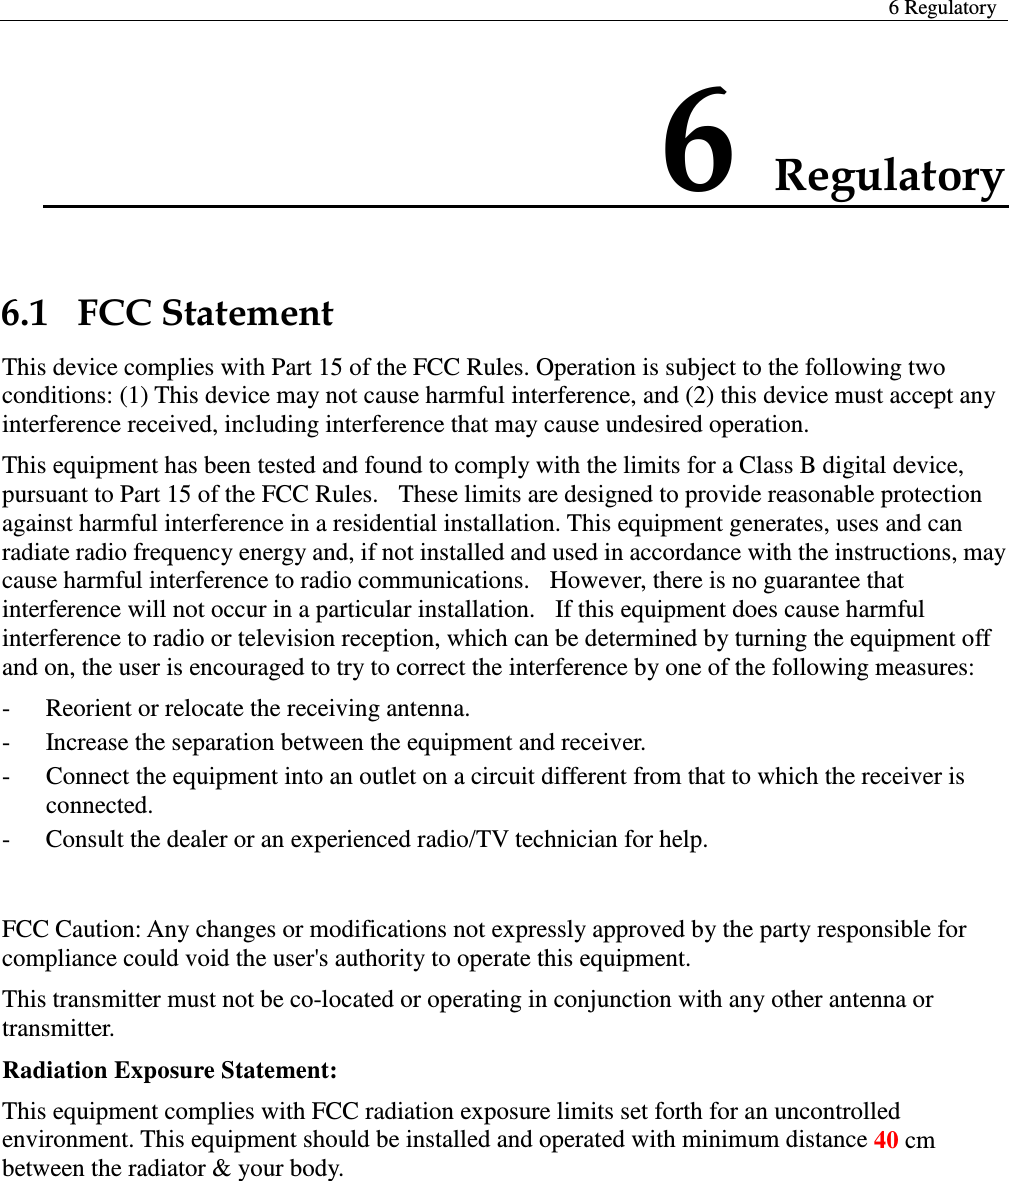  6 Regulatory  6 Regulatory 6.1   FCC Statement This device complies with Part 15 of the FCC Rules. Operation is subject to the following two conditions: (1) This device may not cause harmful interference, and (2) this device must accept any interference received, including interference that may cause undesired operation. This equipment has been tested and found to comply with the limits for a Class B digital device, pursuant to Part 15 of the FCC Rules.  These limits are designed to provide reasonable protection against harmful interference in a residential installation. This equipment generates, uses and can radiate radio frequency energy and, if not installed and used in accordance with the instructions, may cause harmful interference to radio communications.  However, there is no guarantee that interference will not occur in a particular installation.   If this equipment does cause harmful interference to radio or television reception, which can be determined by turning the equipment off and on, the user is encouraged to try to correct the interference by one of the following measures: -  Reorient or relocate the receiving antenna. -  Increase the separation between the equipment and receiver. -  Connect the equipment into an outlet on a circuit different from that to which the receiver is connected. -  Consult the dealer or an experienced radio/TV technician for help.  FCC Caution: Any changes or modifications not expressly approved by the party responsible for compliance could void the user&apos;s authority to operate this equipment. This transmitter must not be co-located or operating in conjunction with any other antenna or transmitter. Radiation Exposure Statement:   This equipment complies with FCC radiation exposure limits set forth for an uncontrolled environment. This equipment should be installed and operated with minimum distance 40 cm between the radiator &amp; your body.    